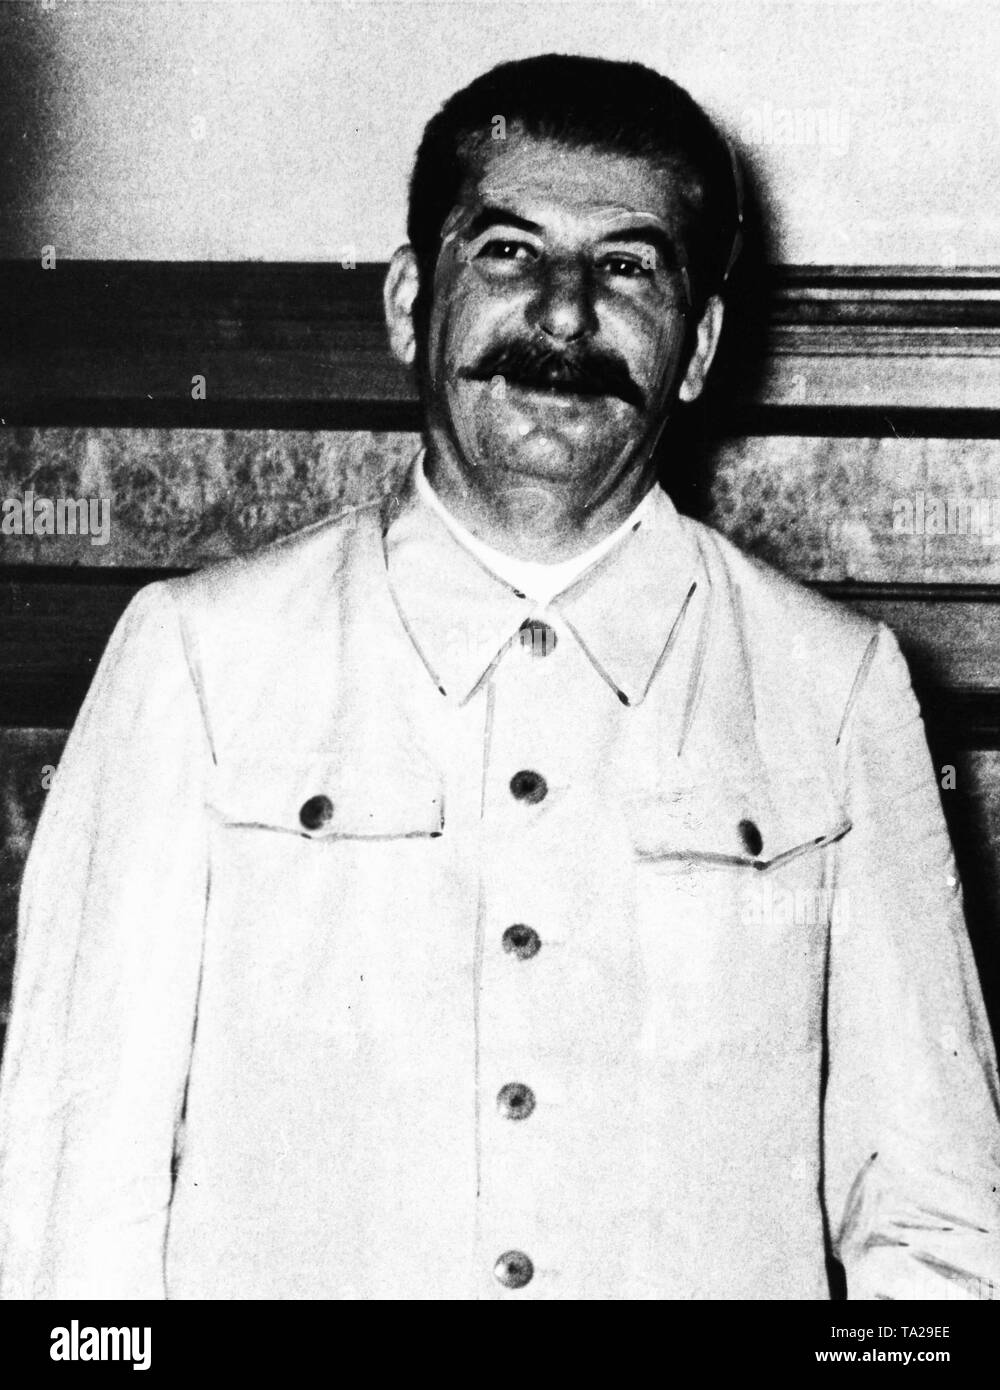 Portrait of Josef Stalin, taken on August 23. 1939 at the signing of the German-Soviet non-aggression pact in the Moscow Kremlin. Stock Photo